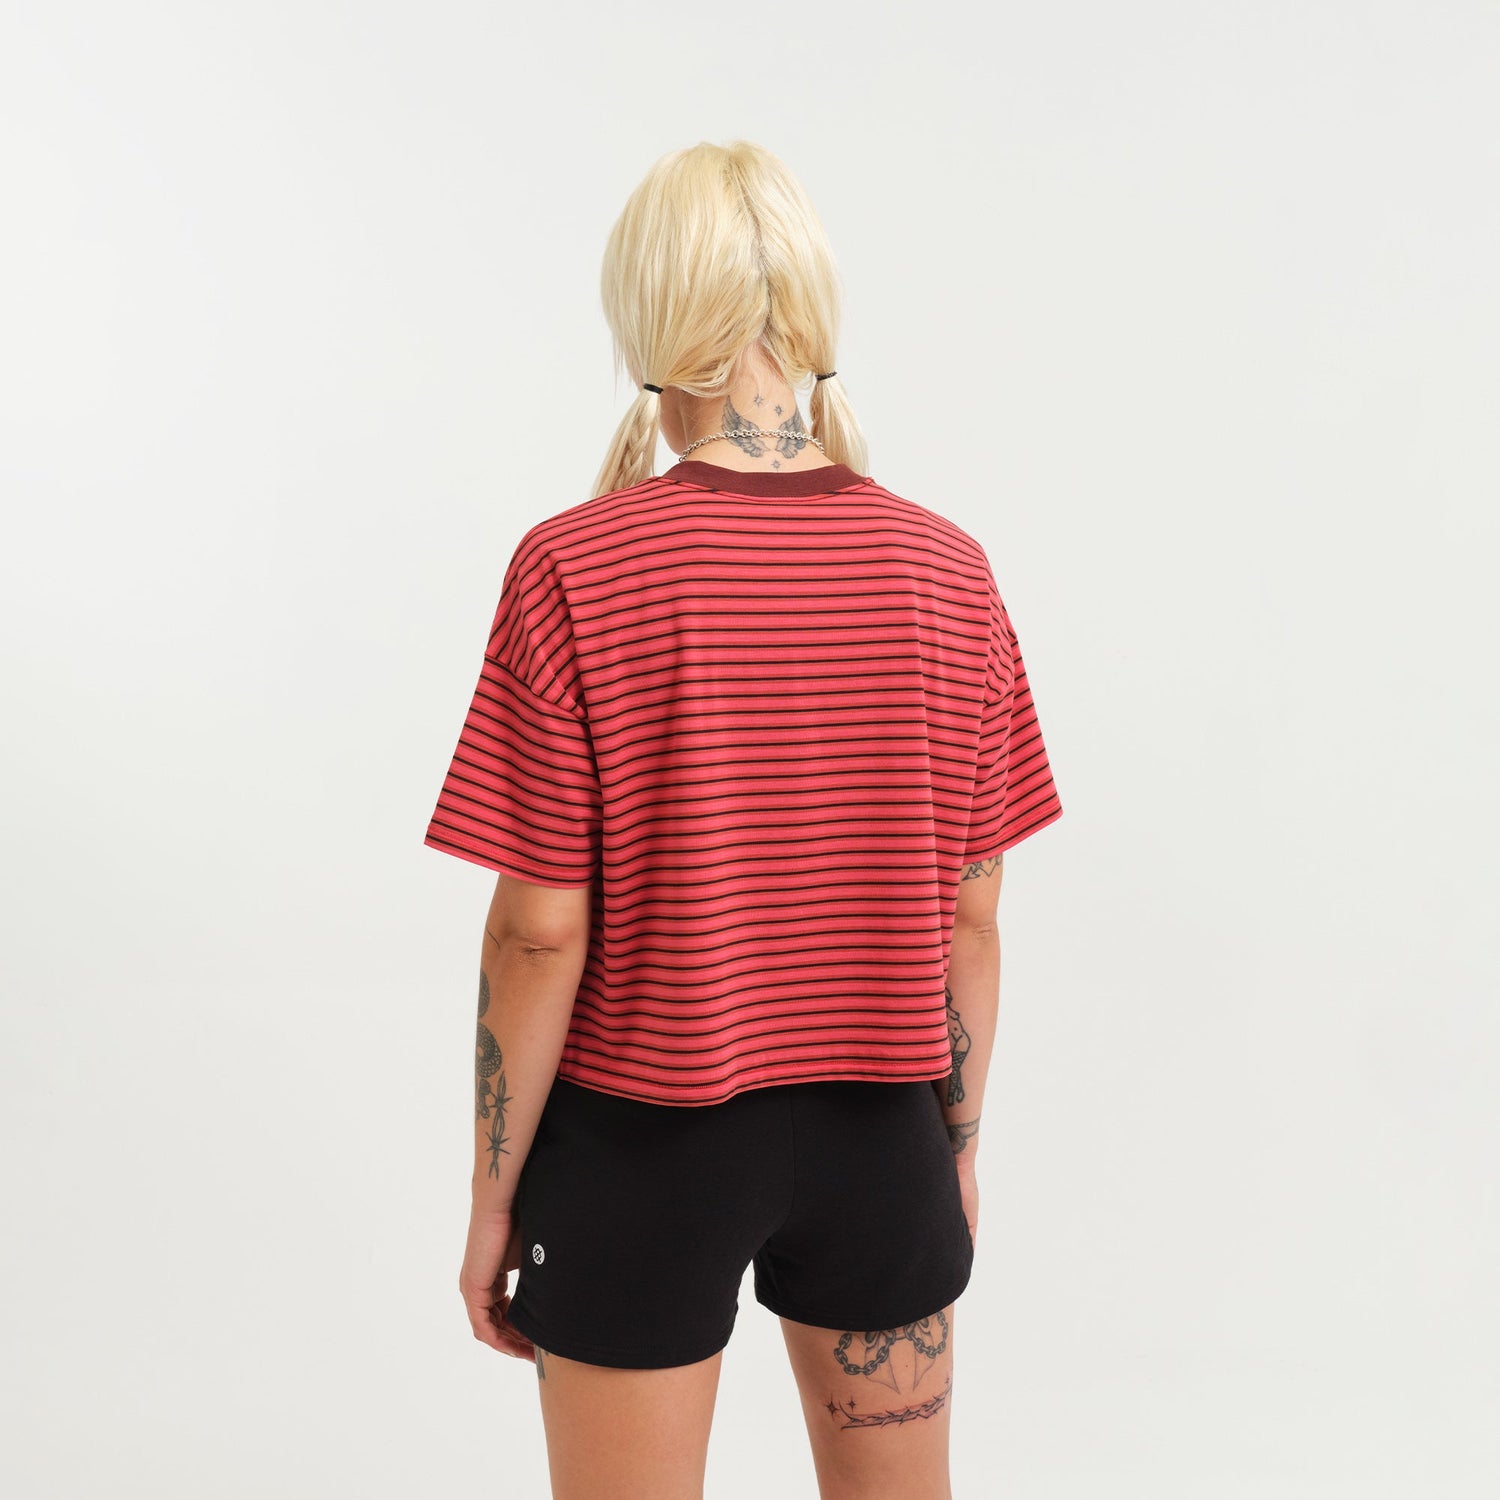 Stance Women's Lay Low Boxy T-Shirt Red Fade |model